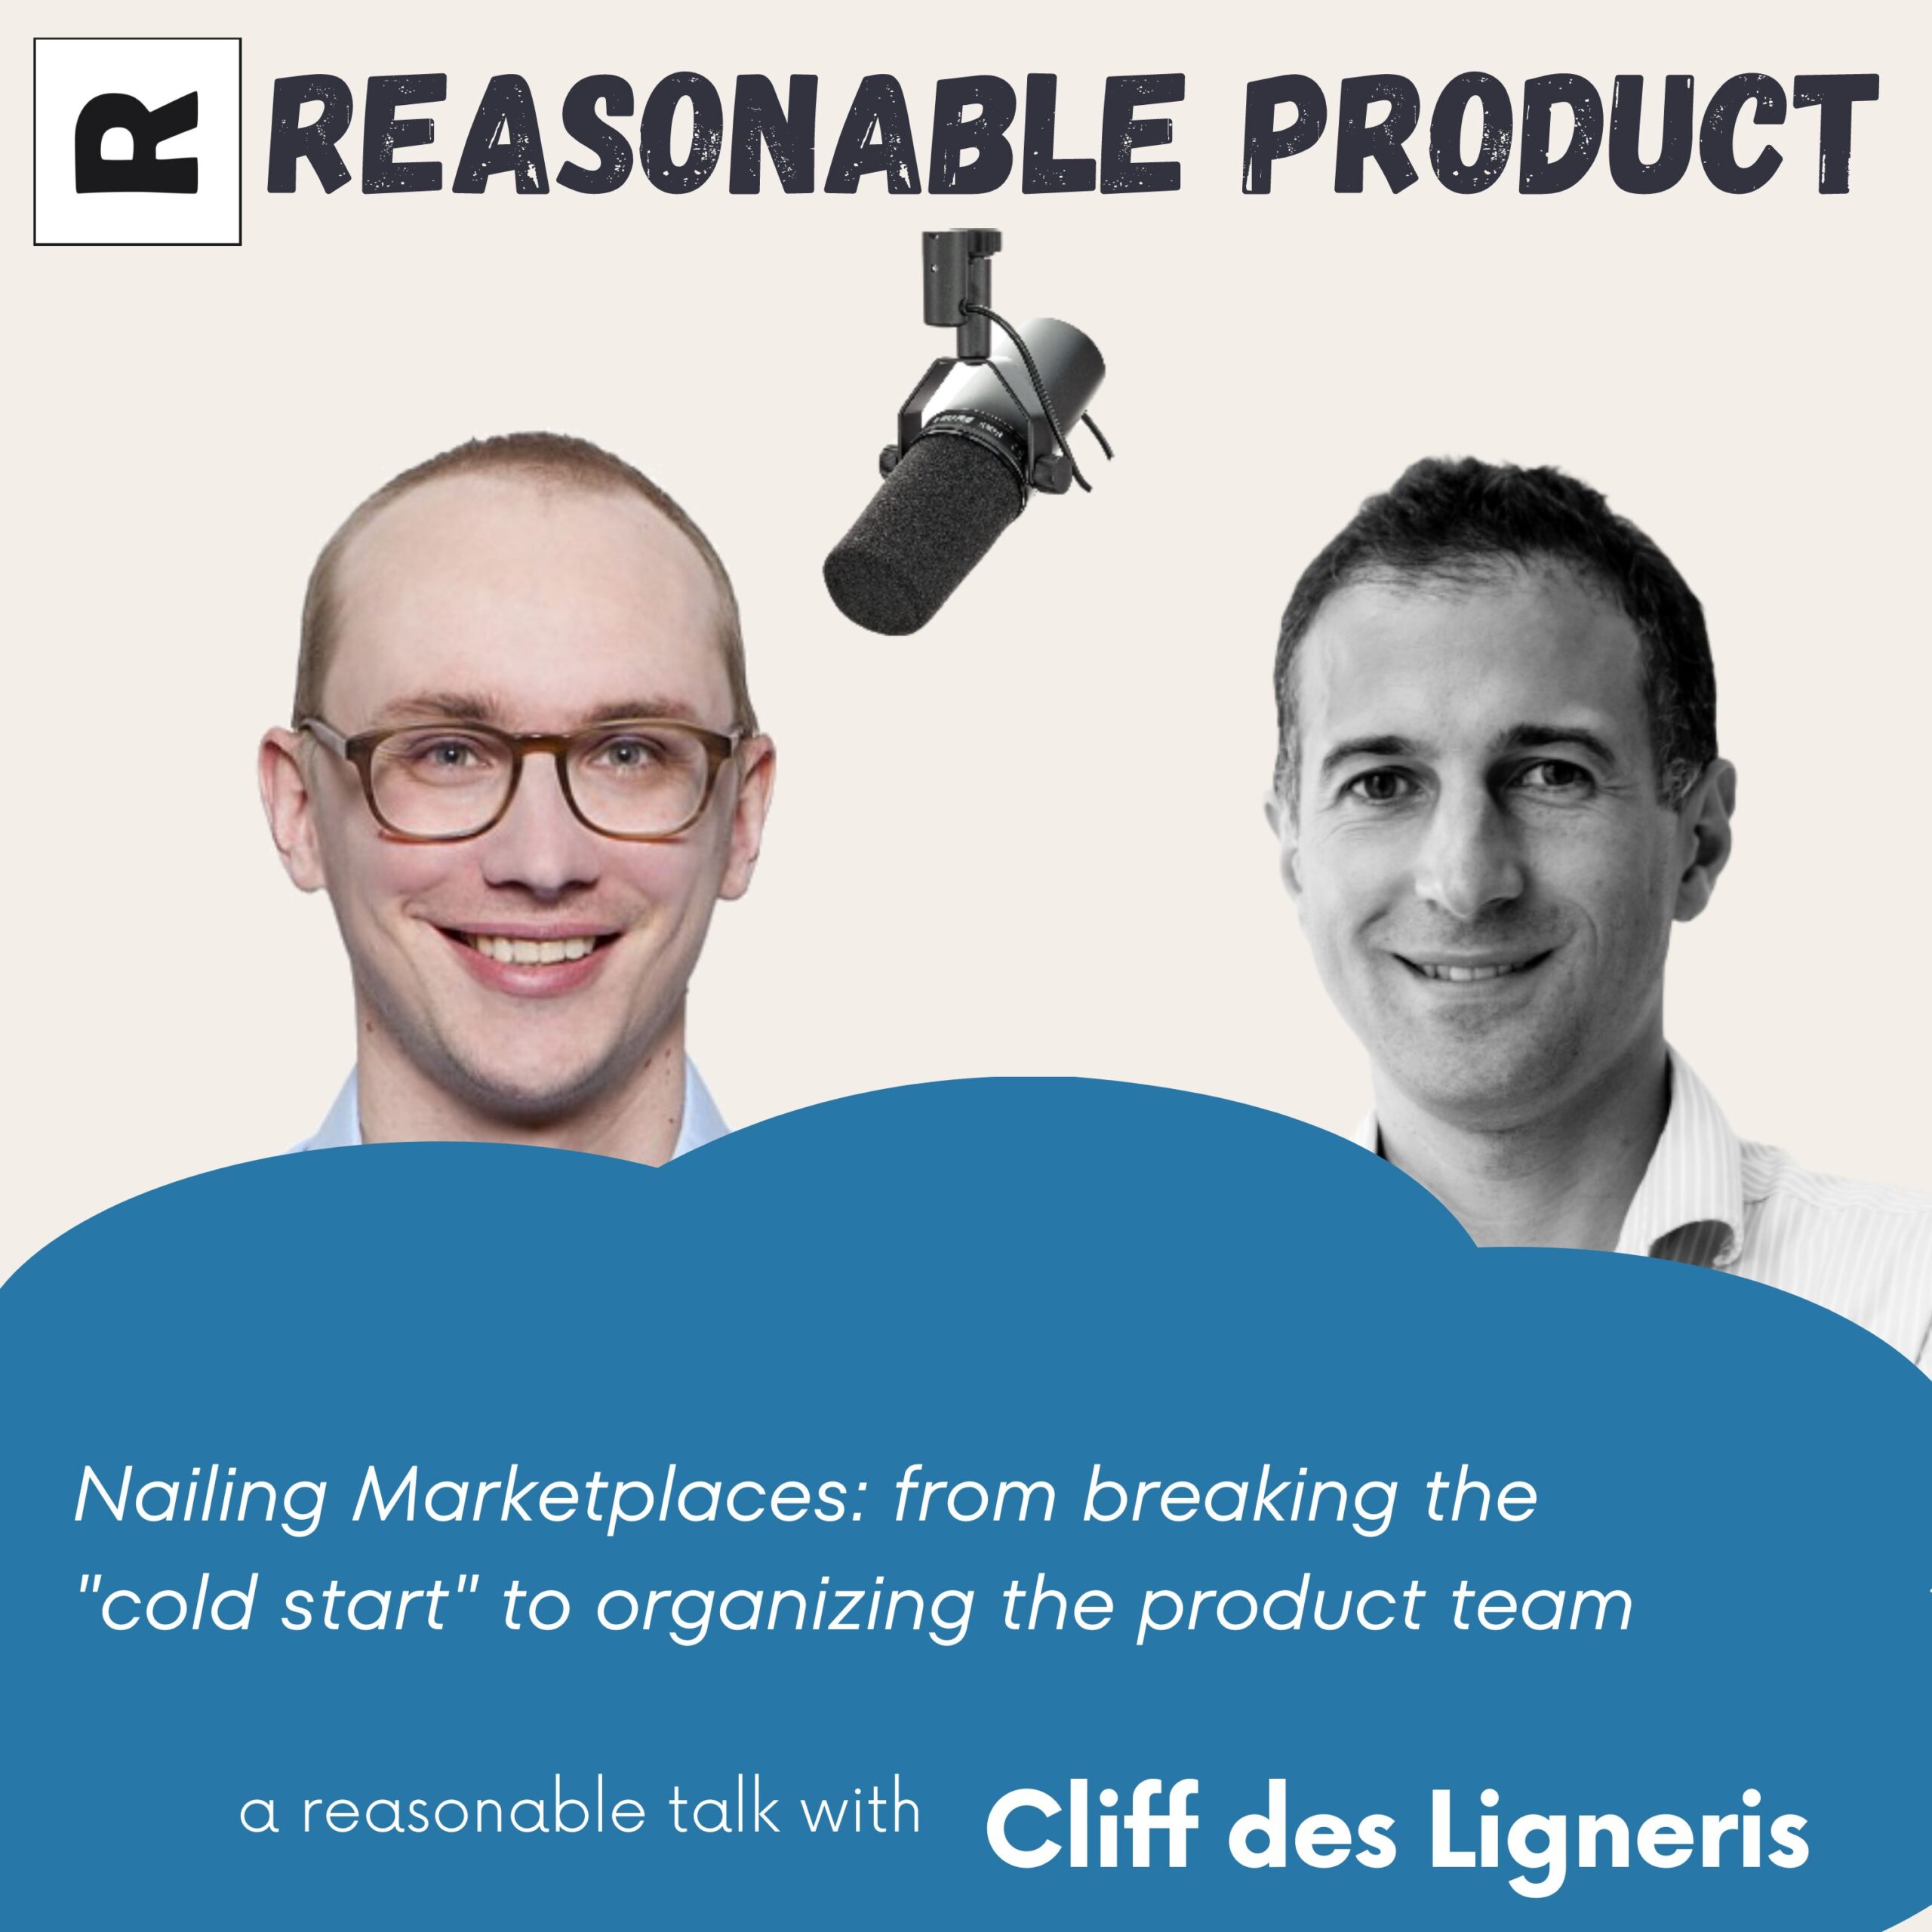 Product in Marketplaces done right: from how to deal with the "cold start", to how to organize the product team - With Cliff des Ligneris (GetYourGuide)